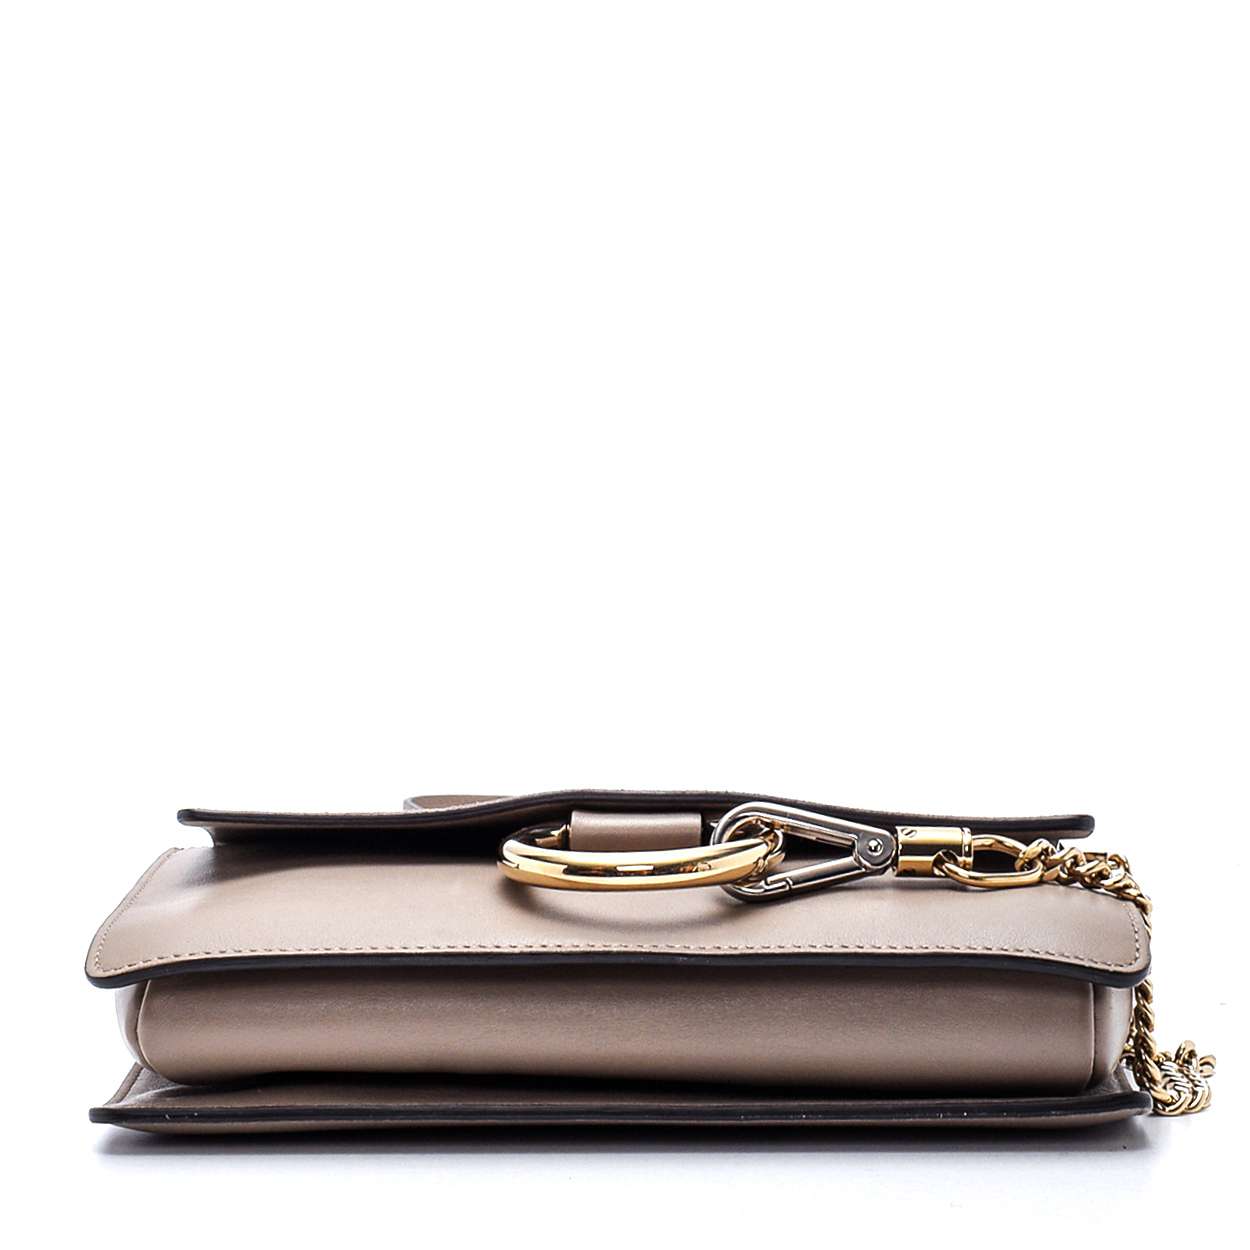 Chloe - Grey Suede and Leather Small Faye Messenger Bag